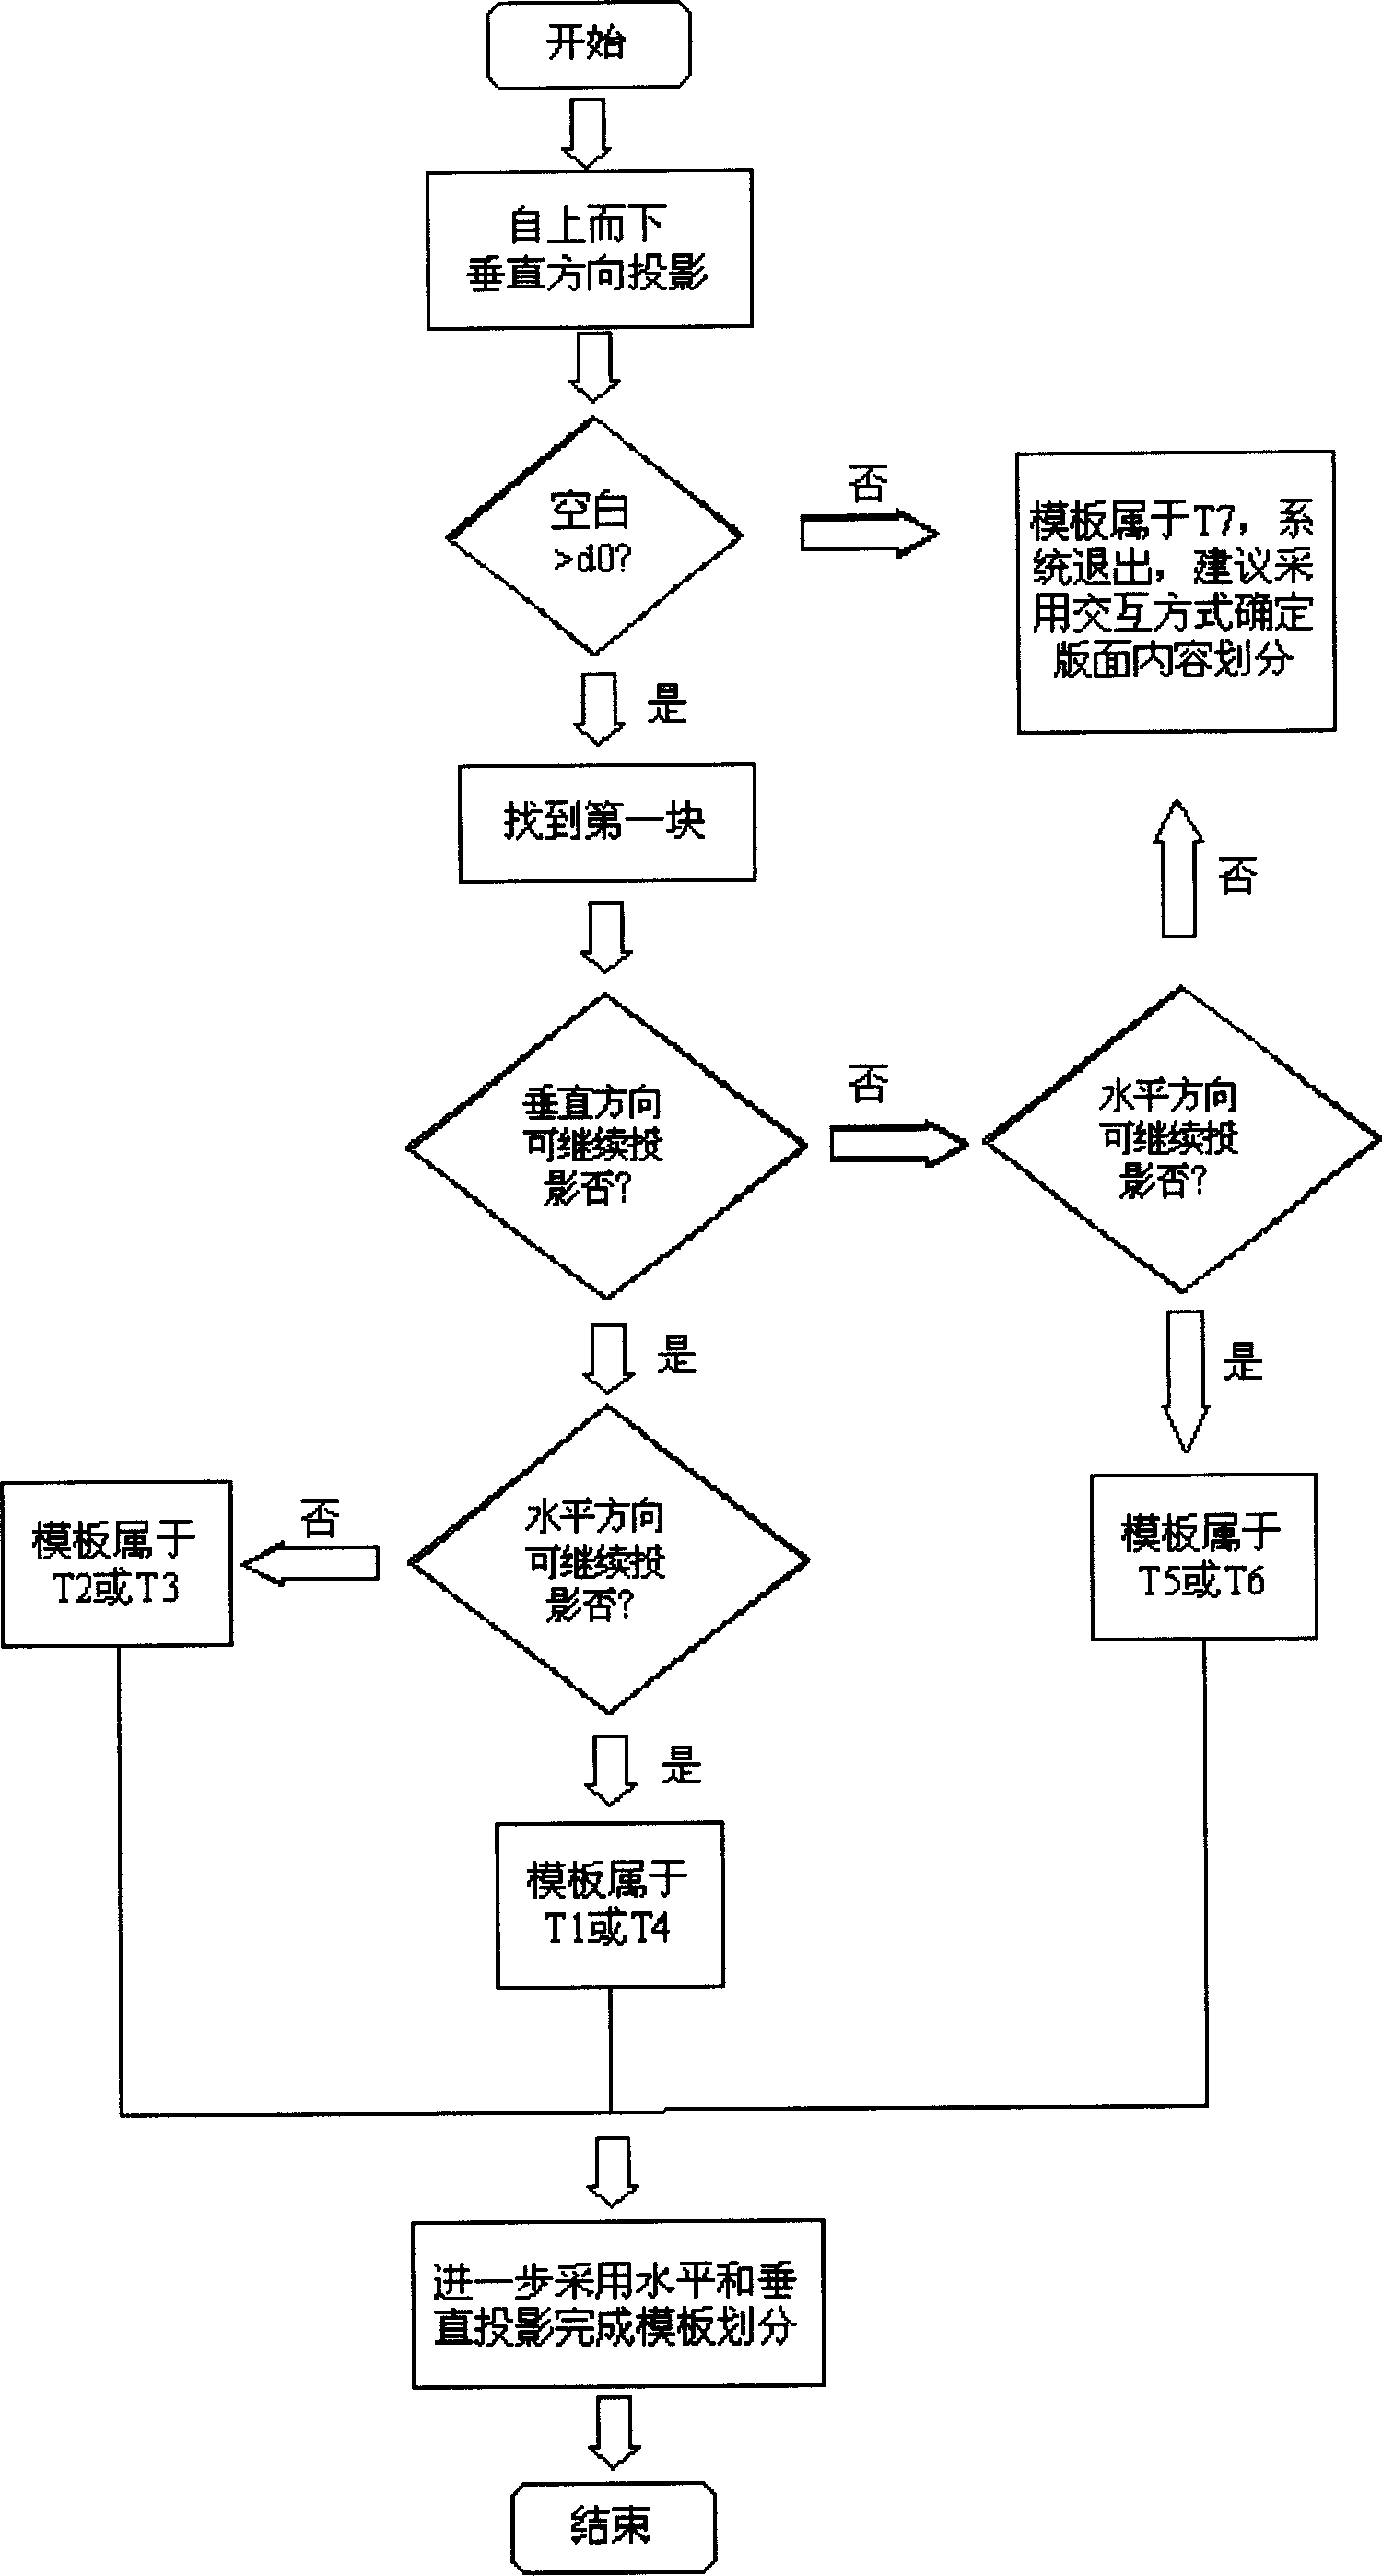 Method for gathering and recording business card information in mobile phone by using image recognition